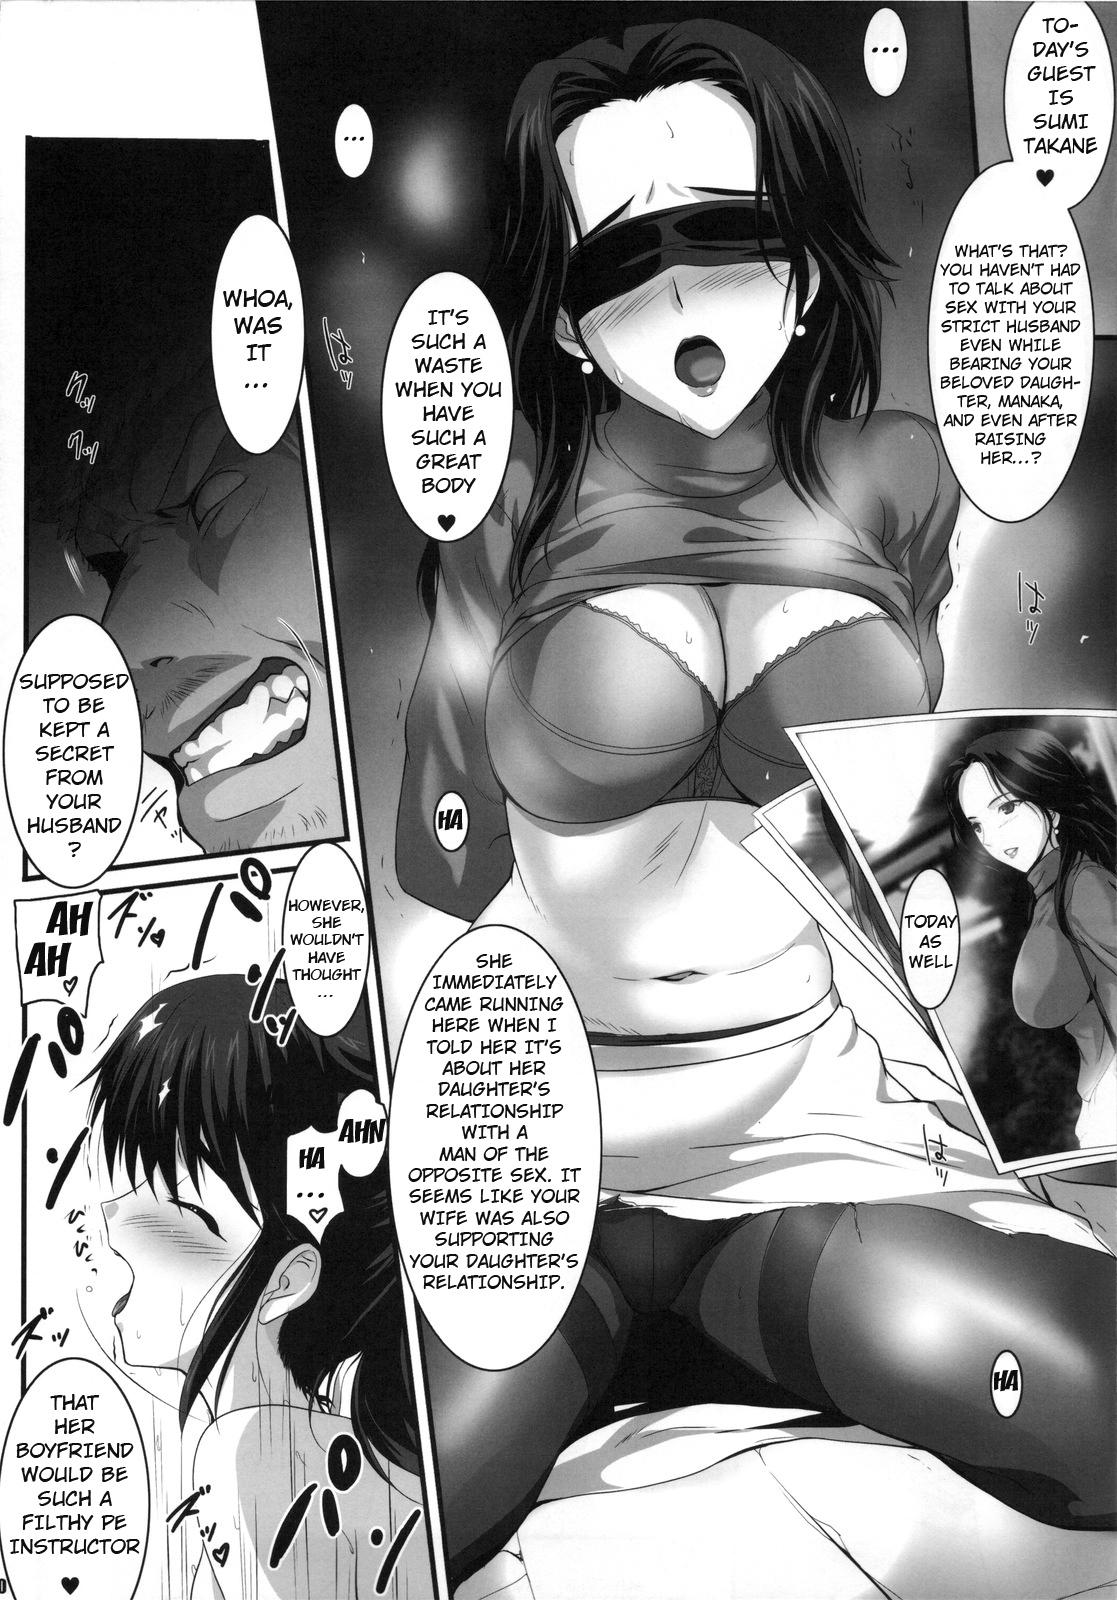 African PILE EDGE LOVE INJECTION - Love plus Dirty - Page 9